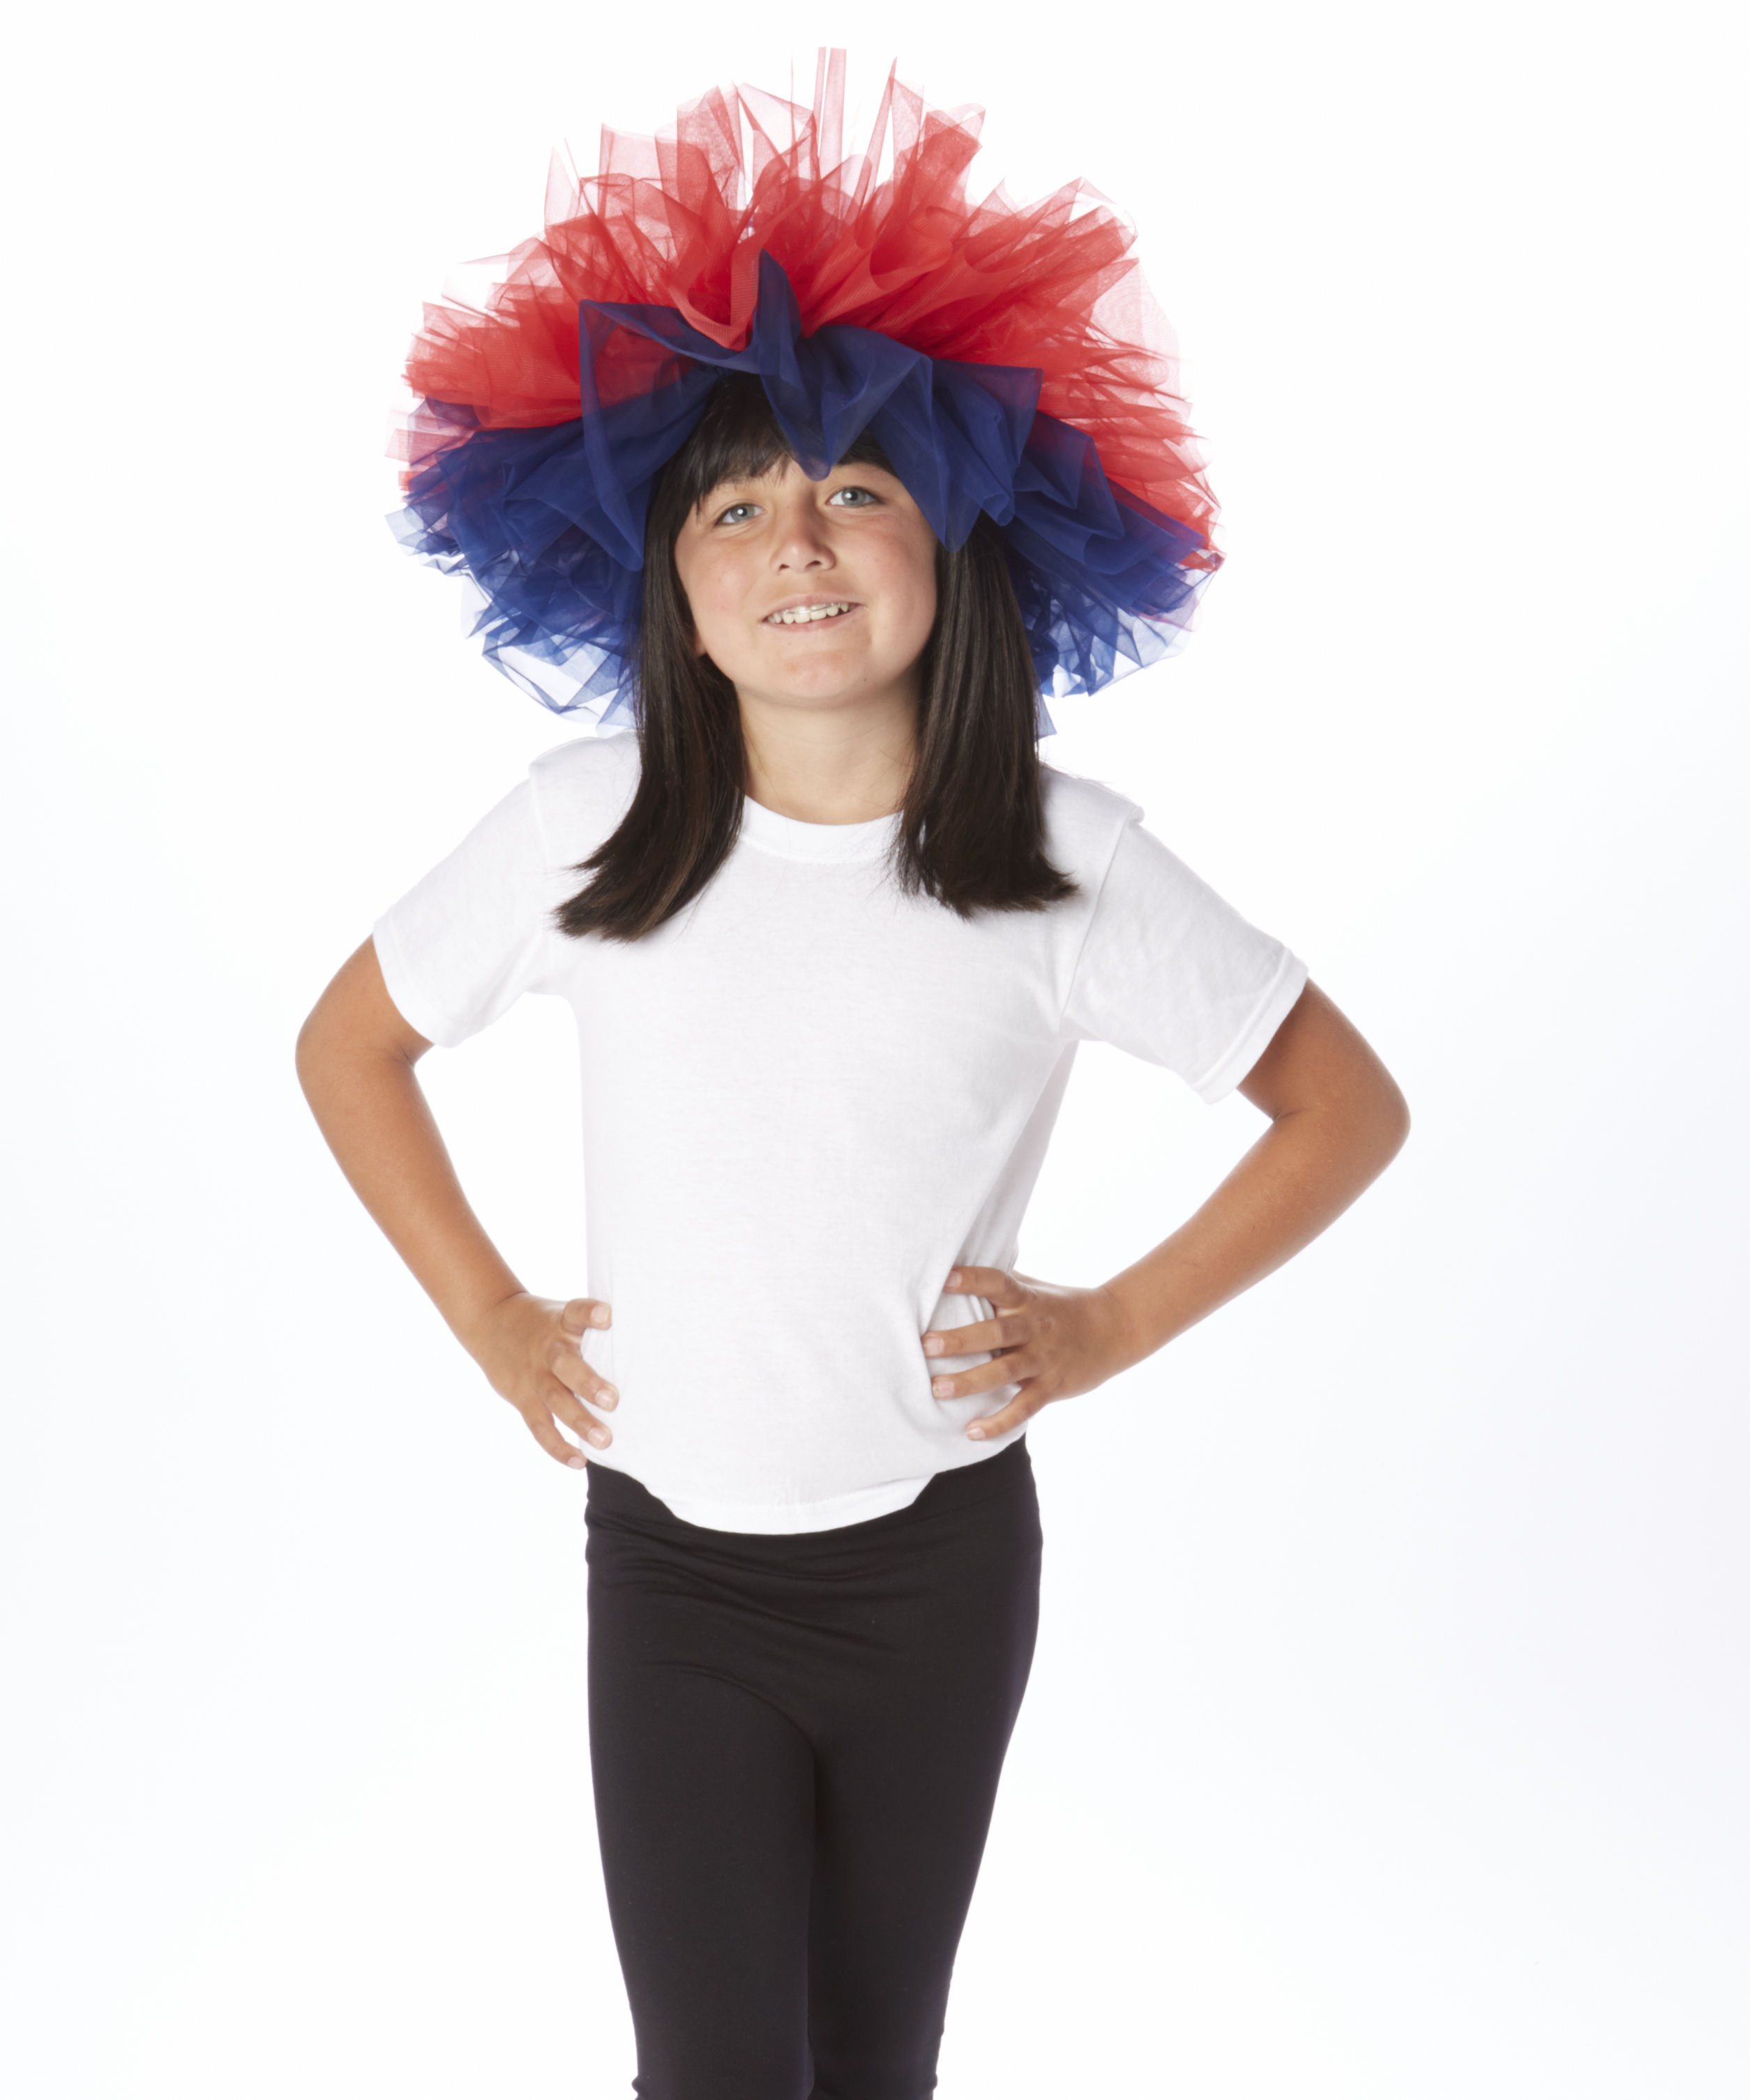 Zelby Gloria modeling for Zulily for their Tutu Spectacular 2014